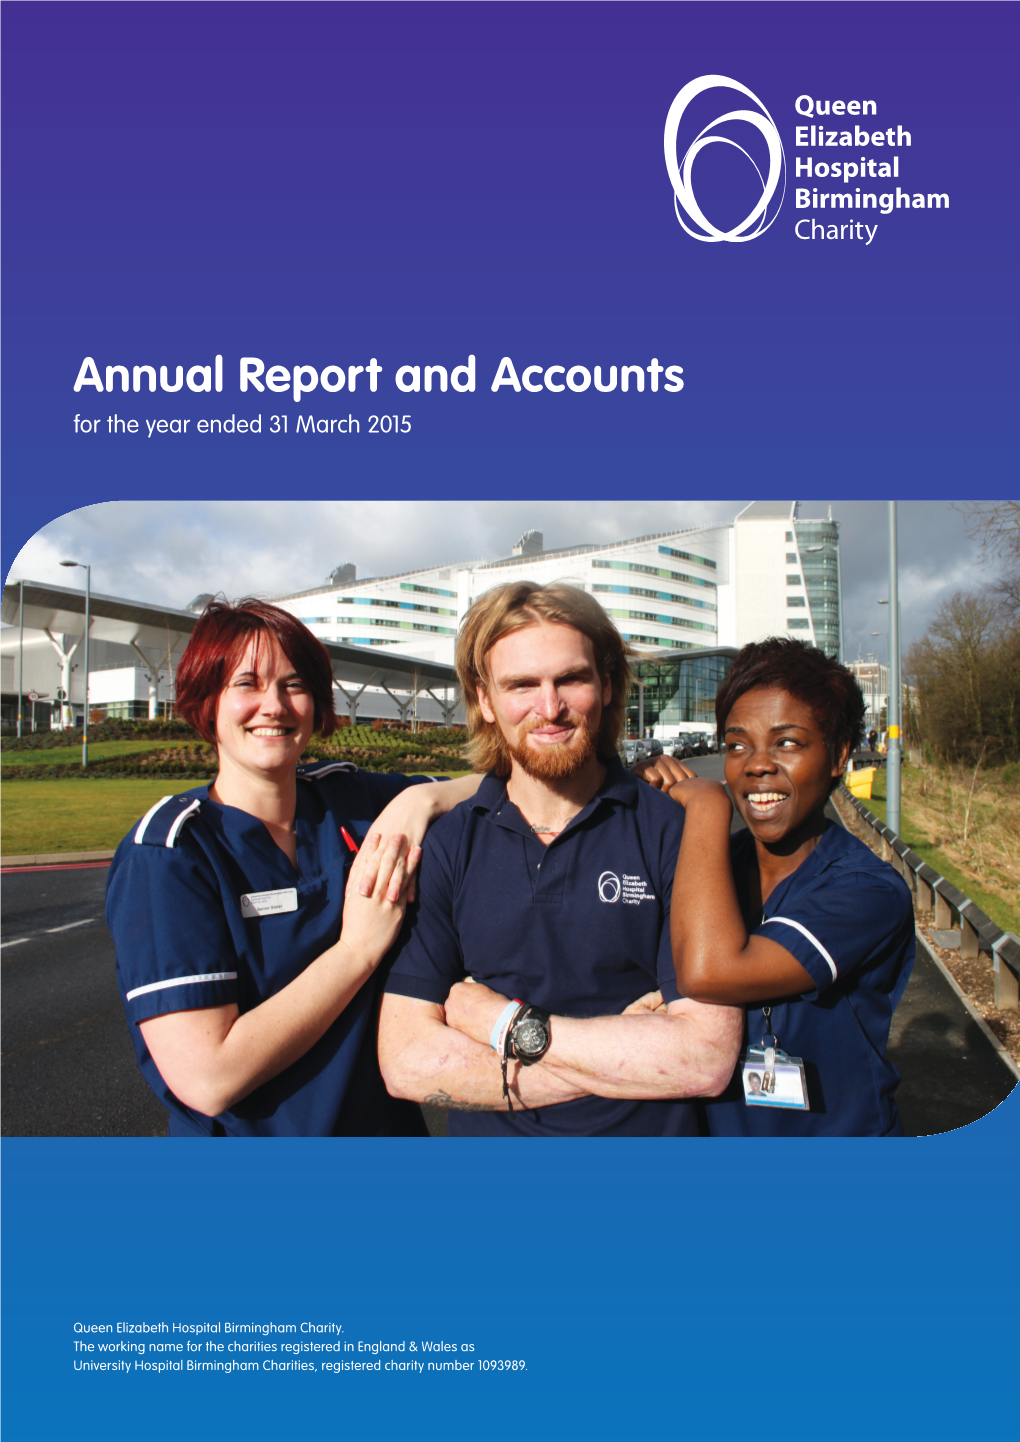 Annual Report and Accounts for the Year Ended 31 March 2015